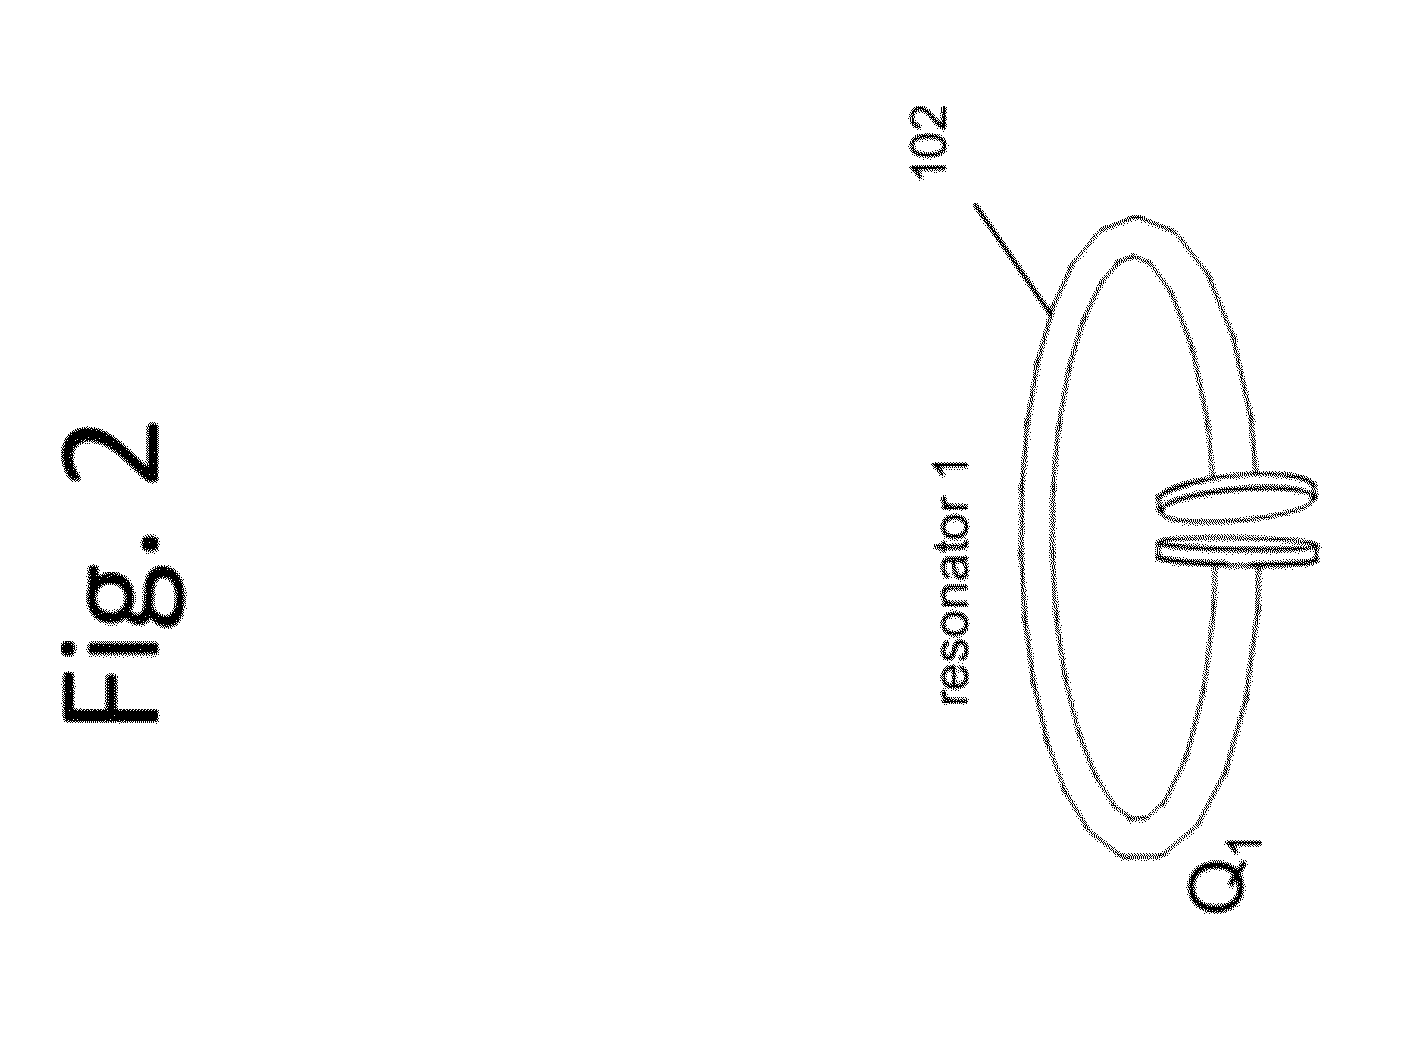 Wireless energy transfer using object positioning for improved k